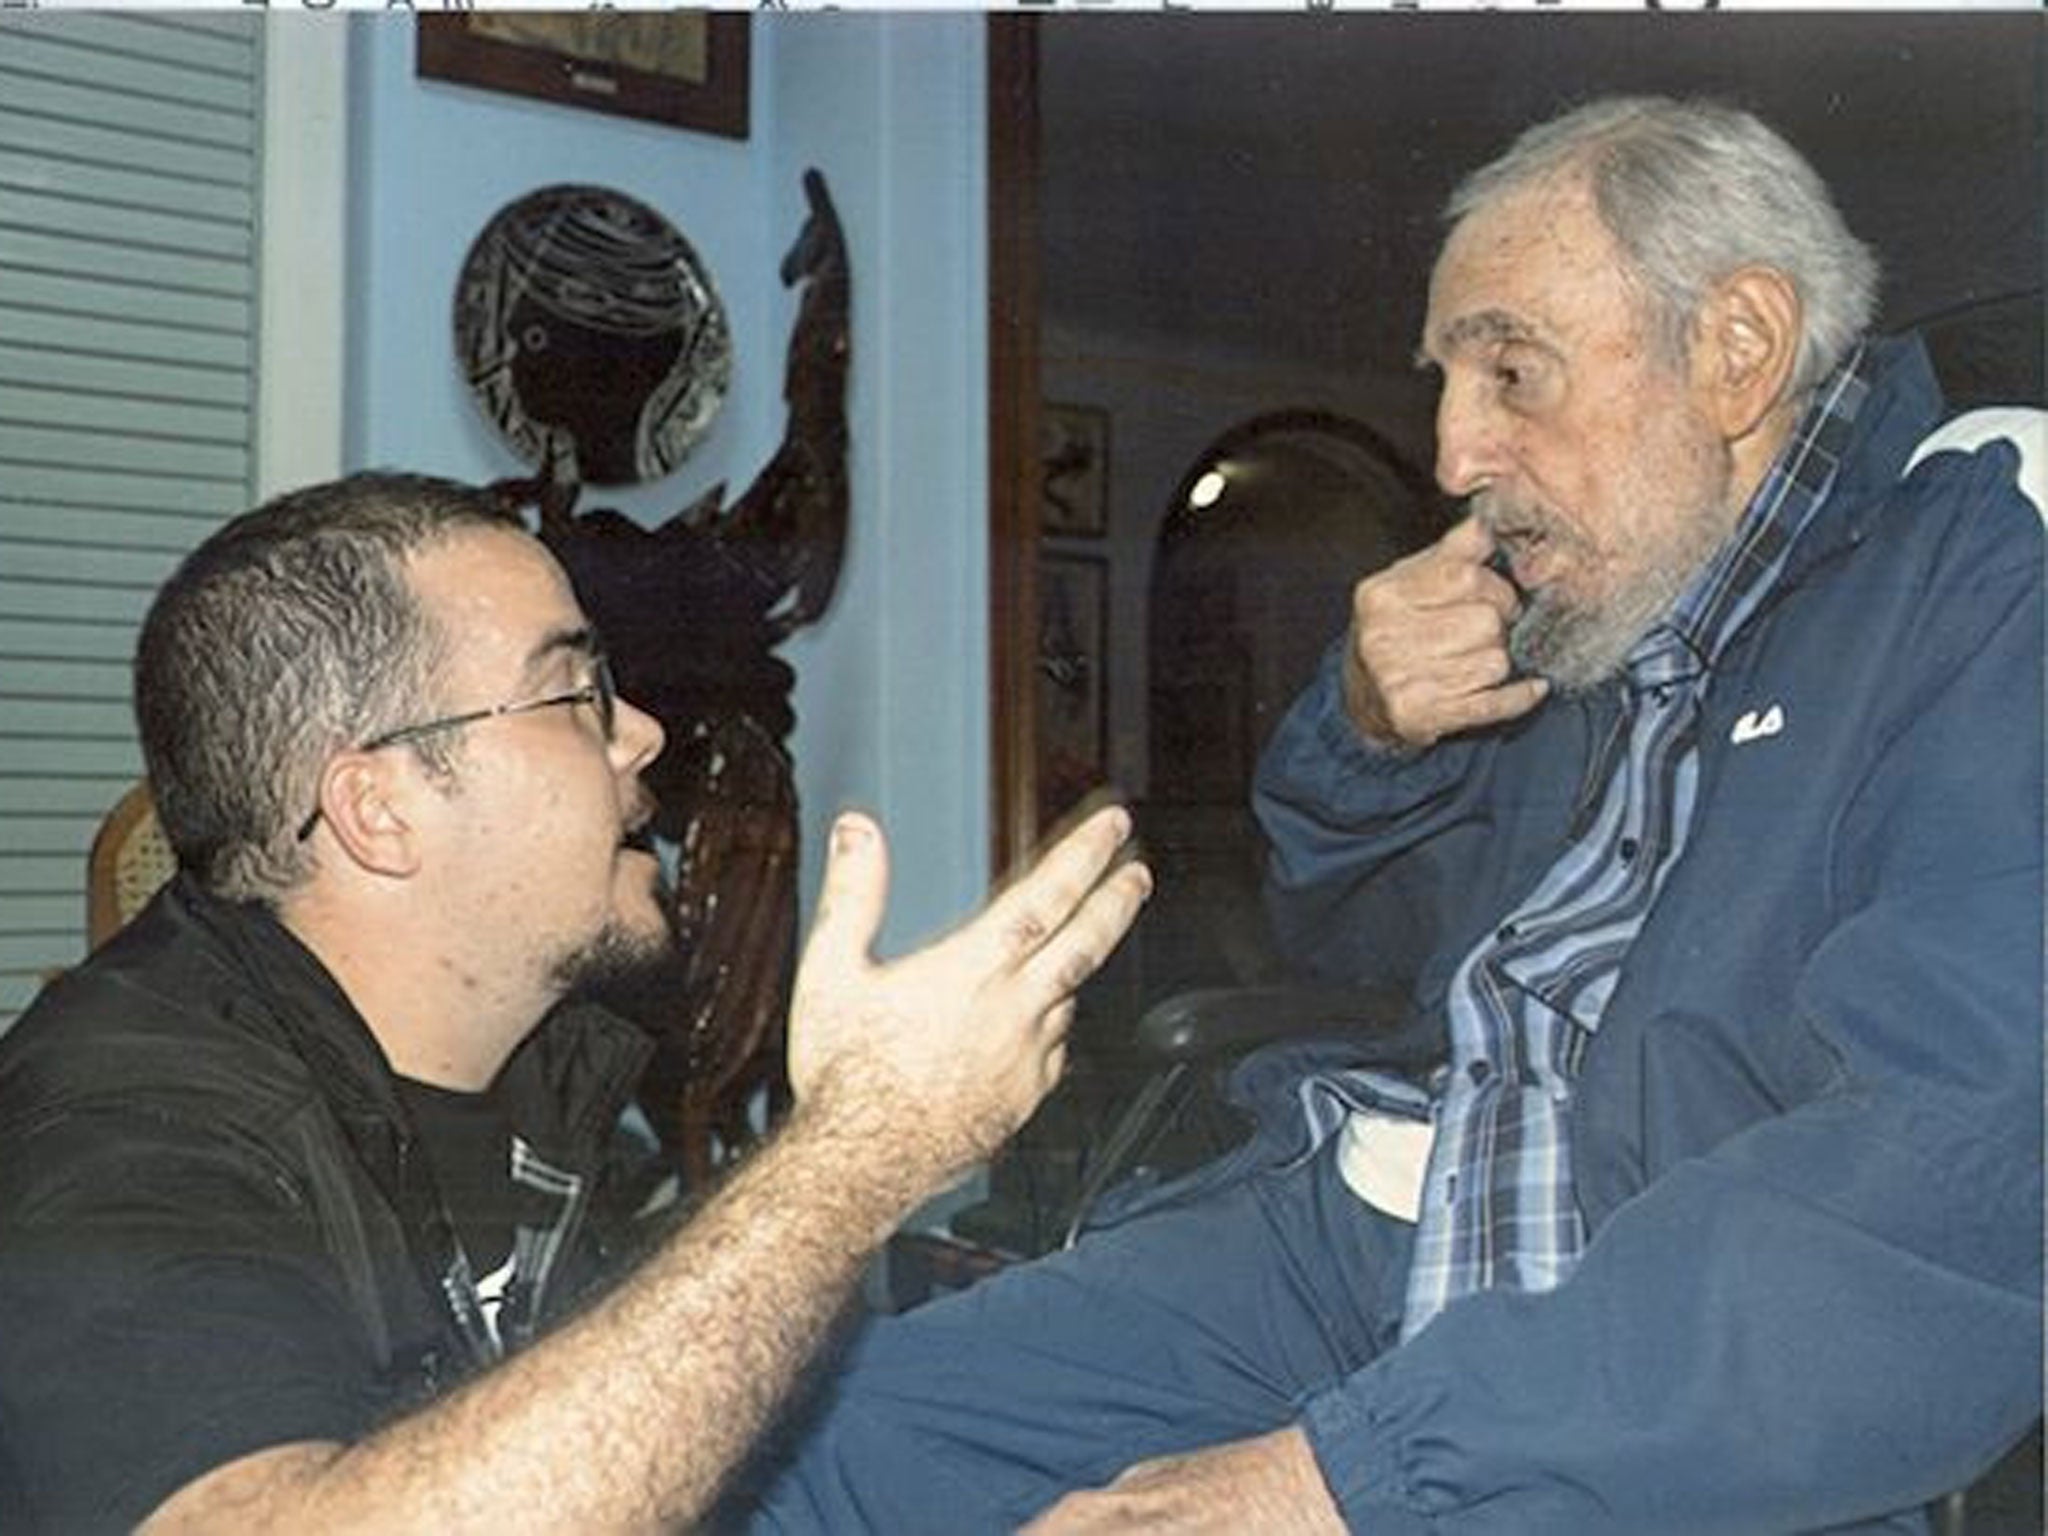 Former Cuban President Fidel Castro talks to President of Cuba's University Students Federation (FEU) Randy Perdomo during a meeting in Havana in this picture provided by Cubadebate. Photographs of Castro, 88, appeared in official media on February 2, 201